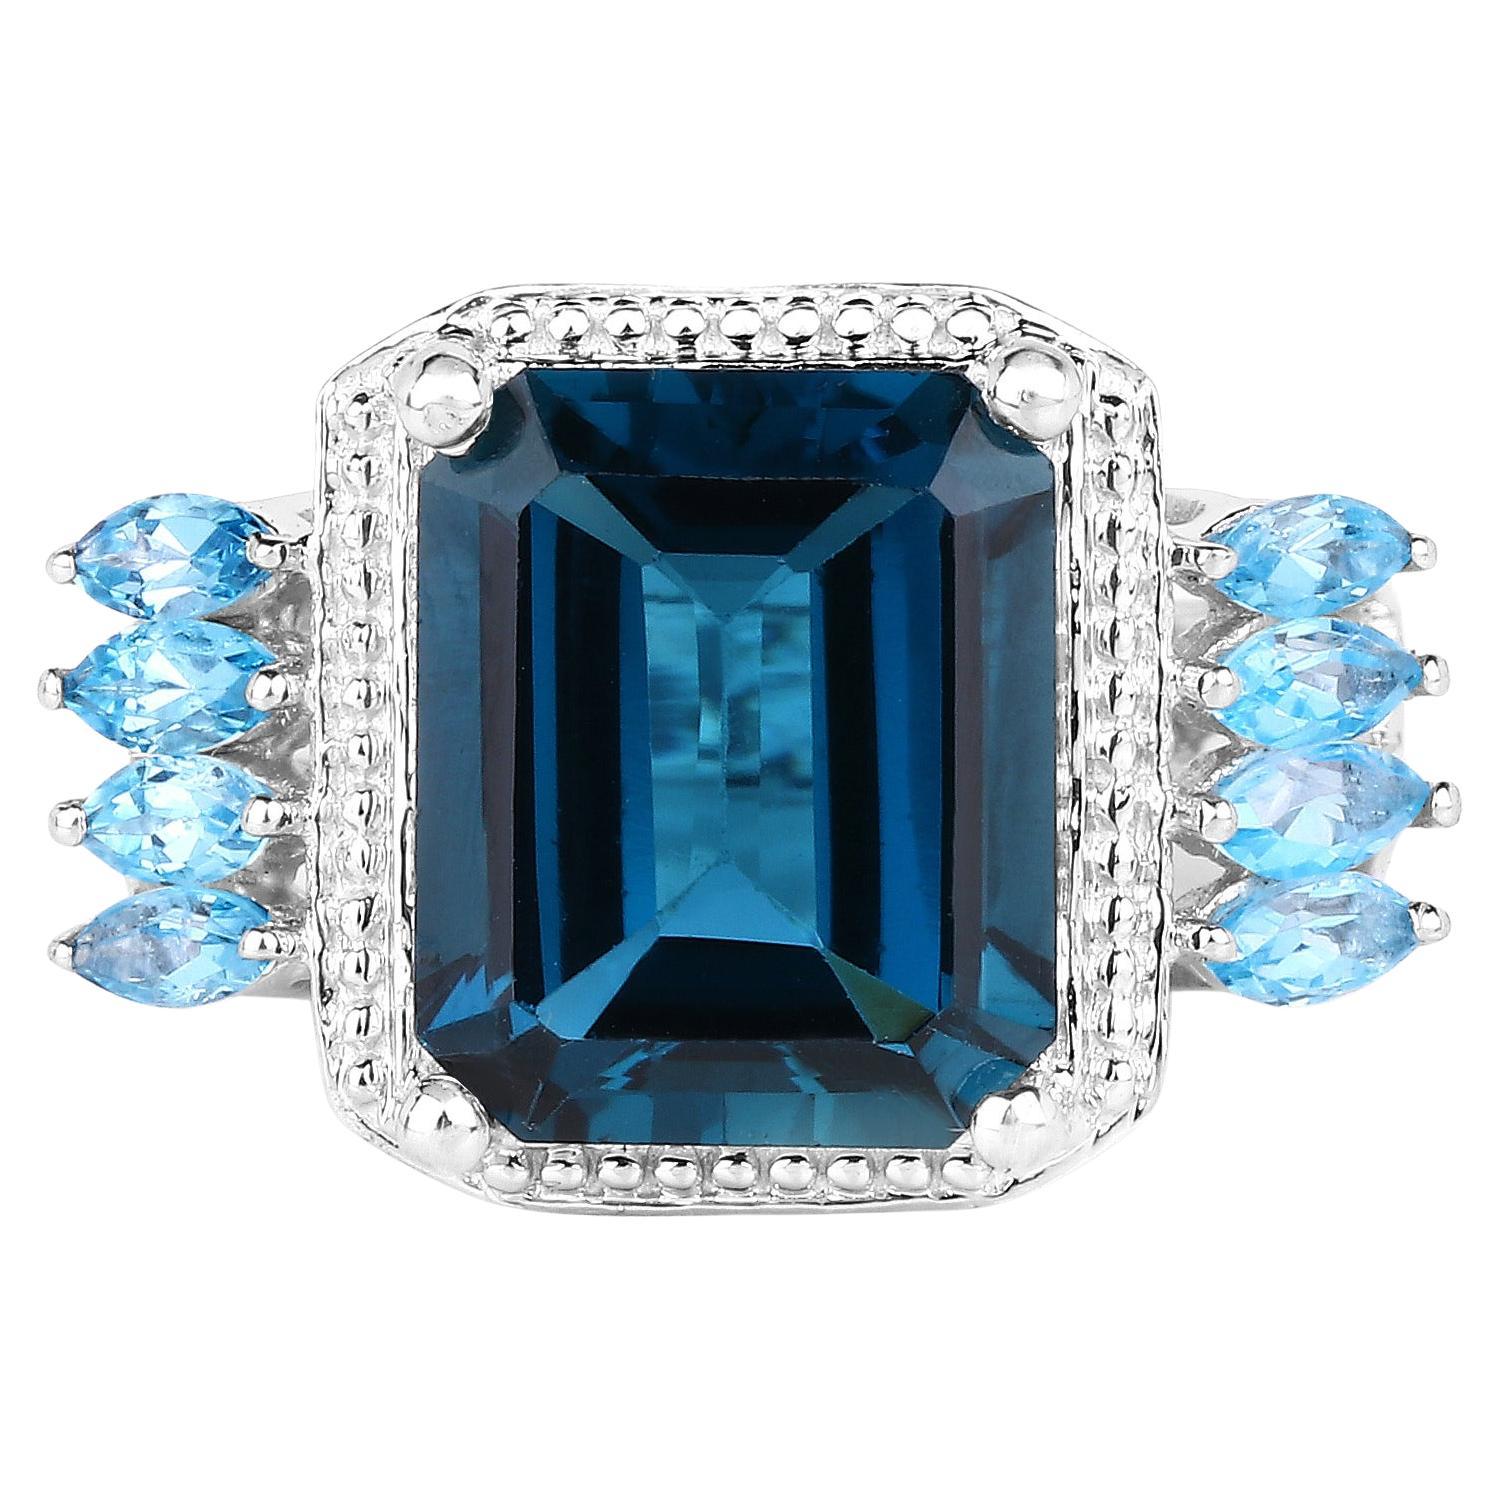 London Blue Topaz Cocktail Ring Swiss Blue Topaz Setting 8.25 Carats For Sale